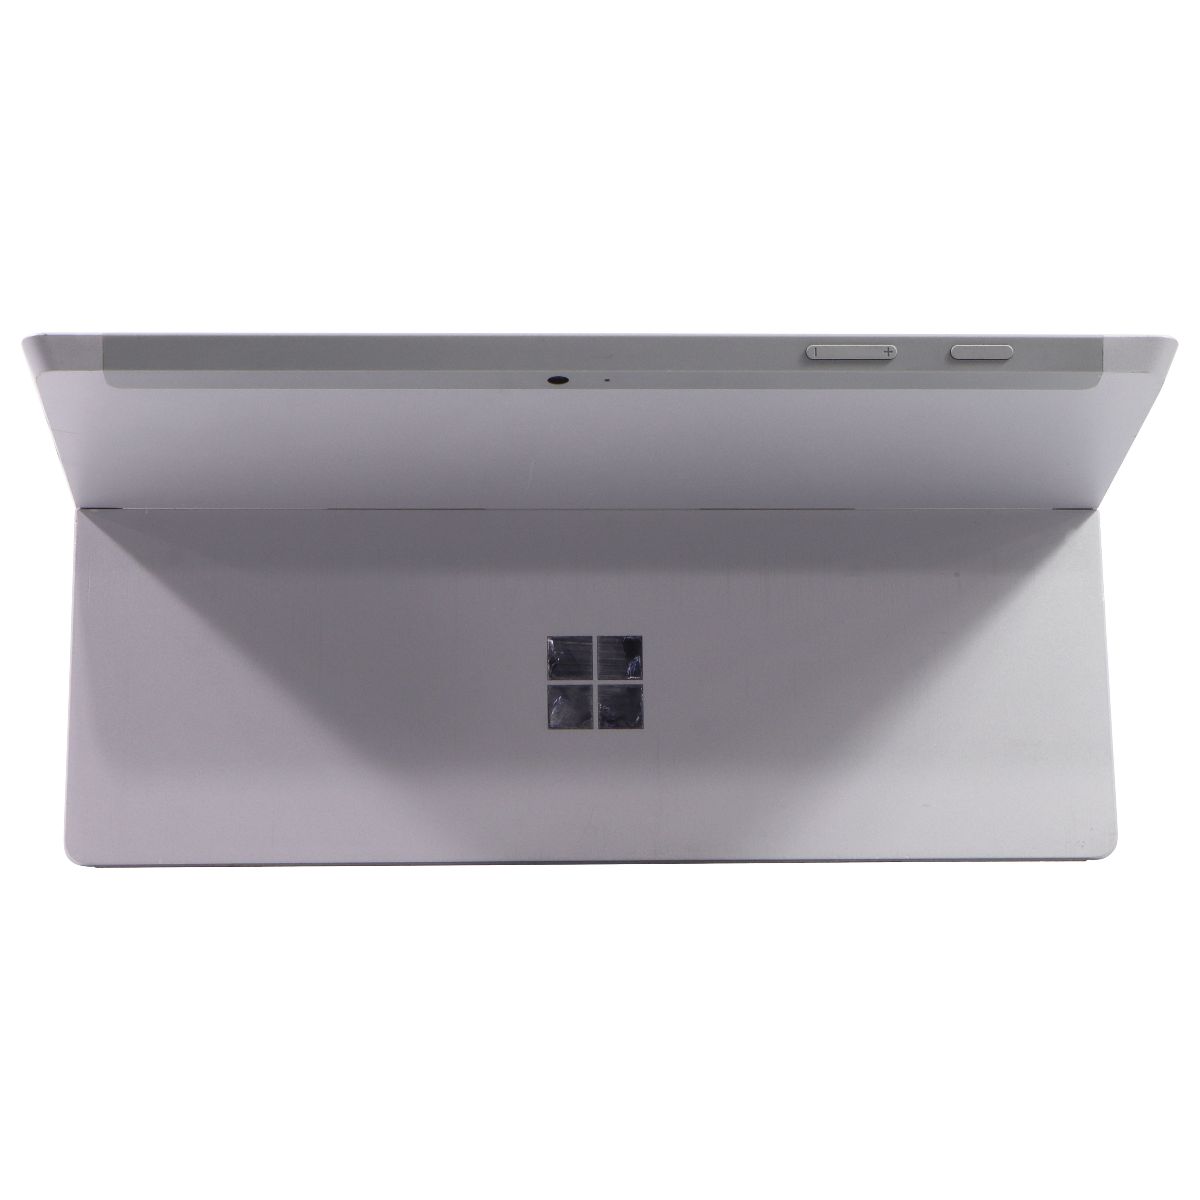 Microsoft Surface 3 (10.8-in) Wi-Fi Tablet x7-Z8700/64GB SSD/2 GB/10 Home (1657) Laptops - PC Laptops & Netbooks Microsoft    - Simple Cell Bulk Wholesale Pricing - USA Seller